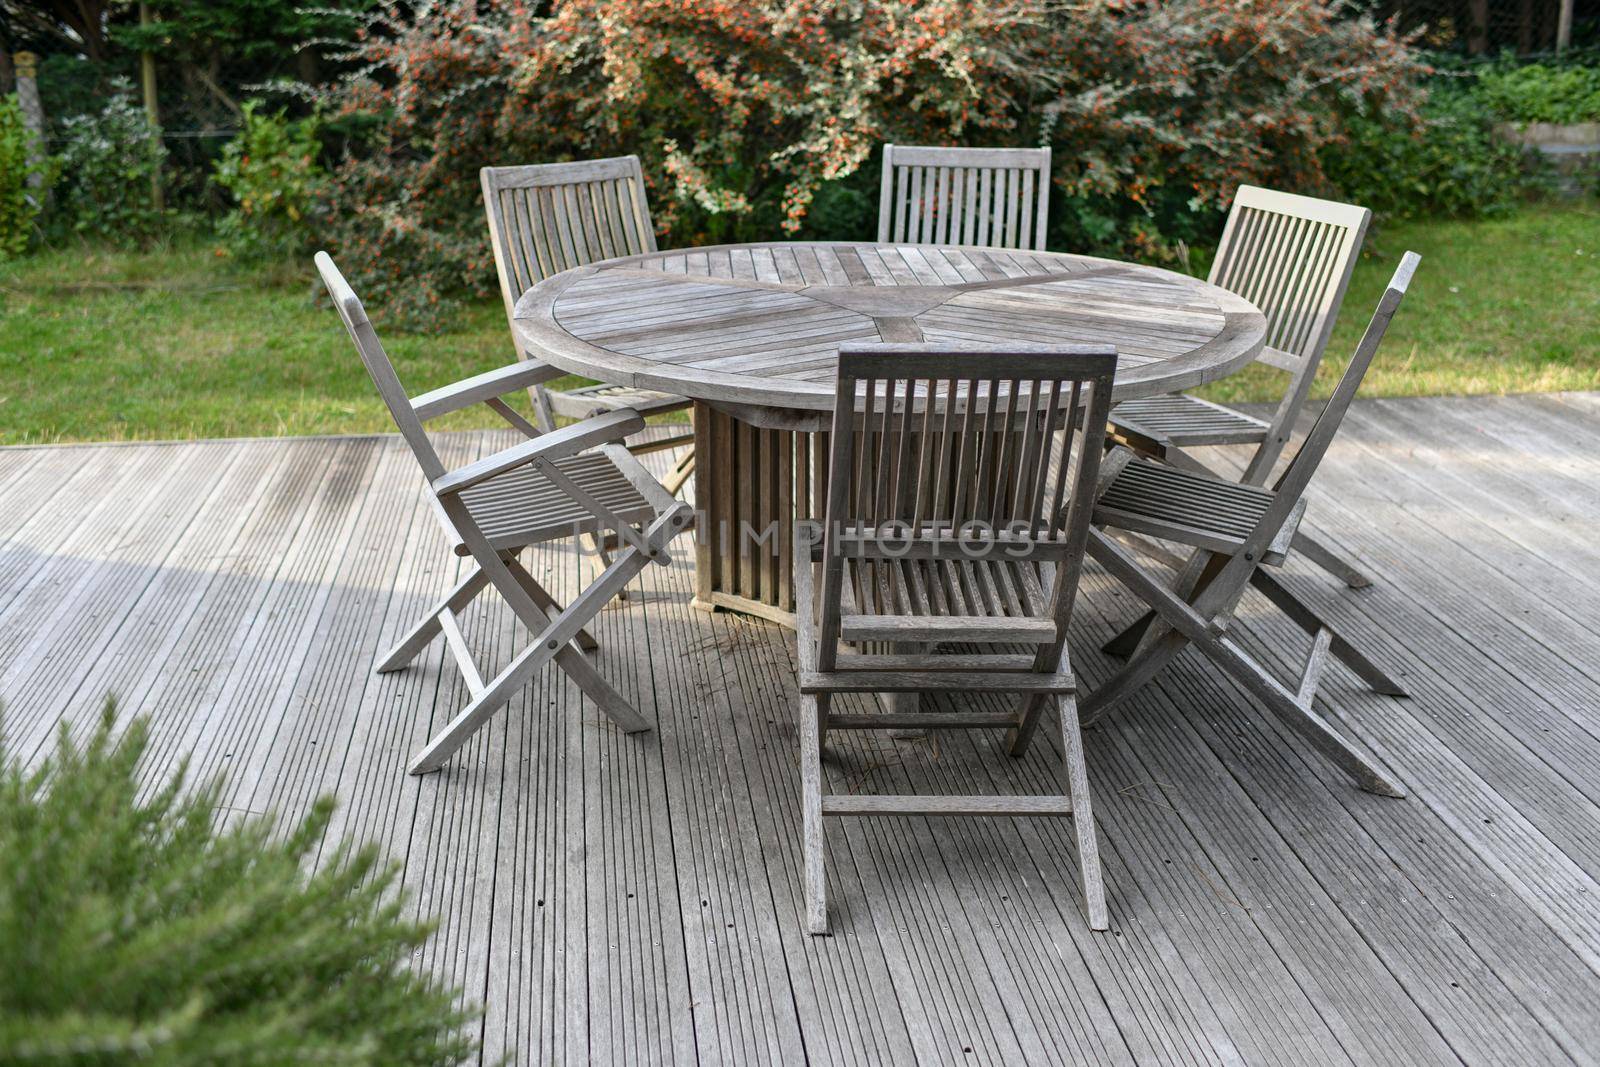 A round Dining Table with Chairs, garden furniture dining set.